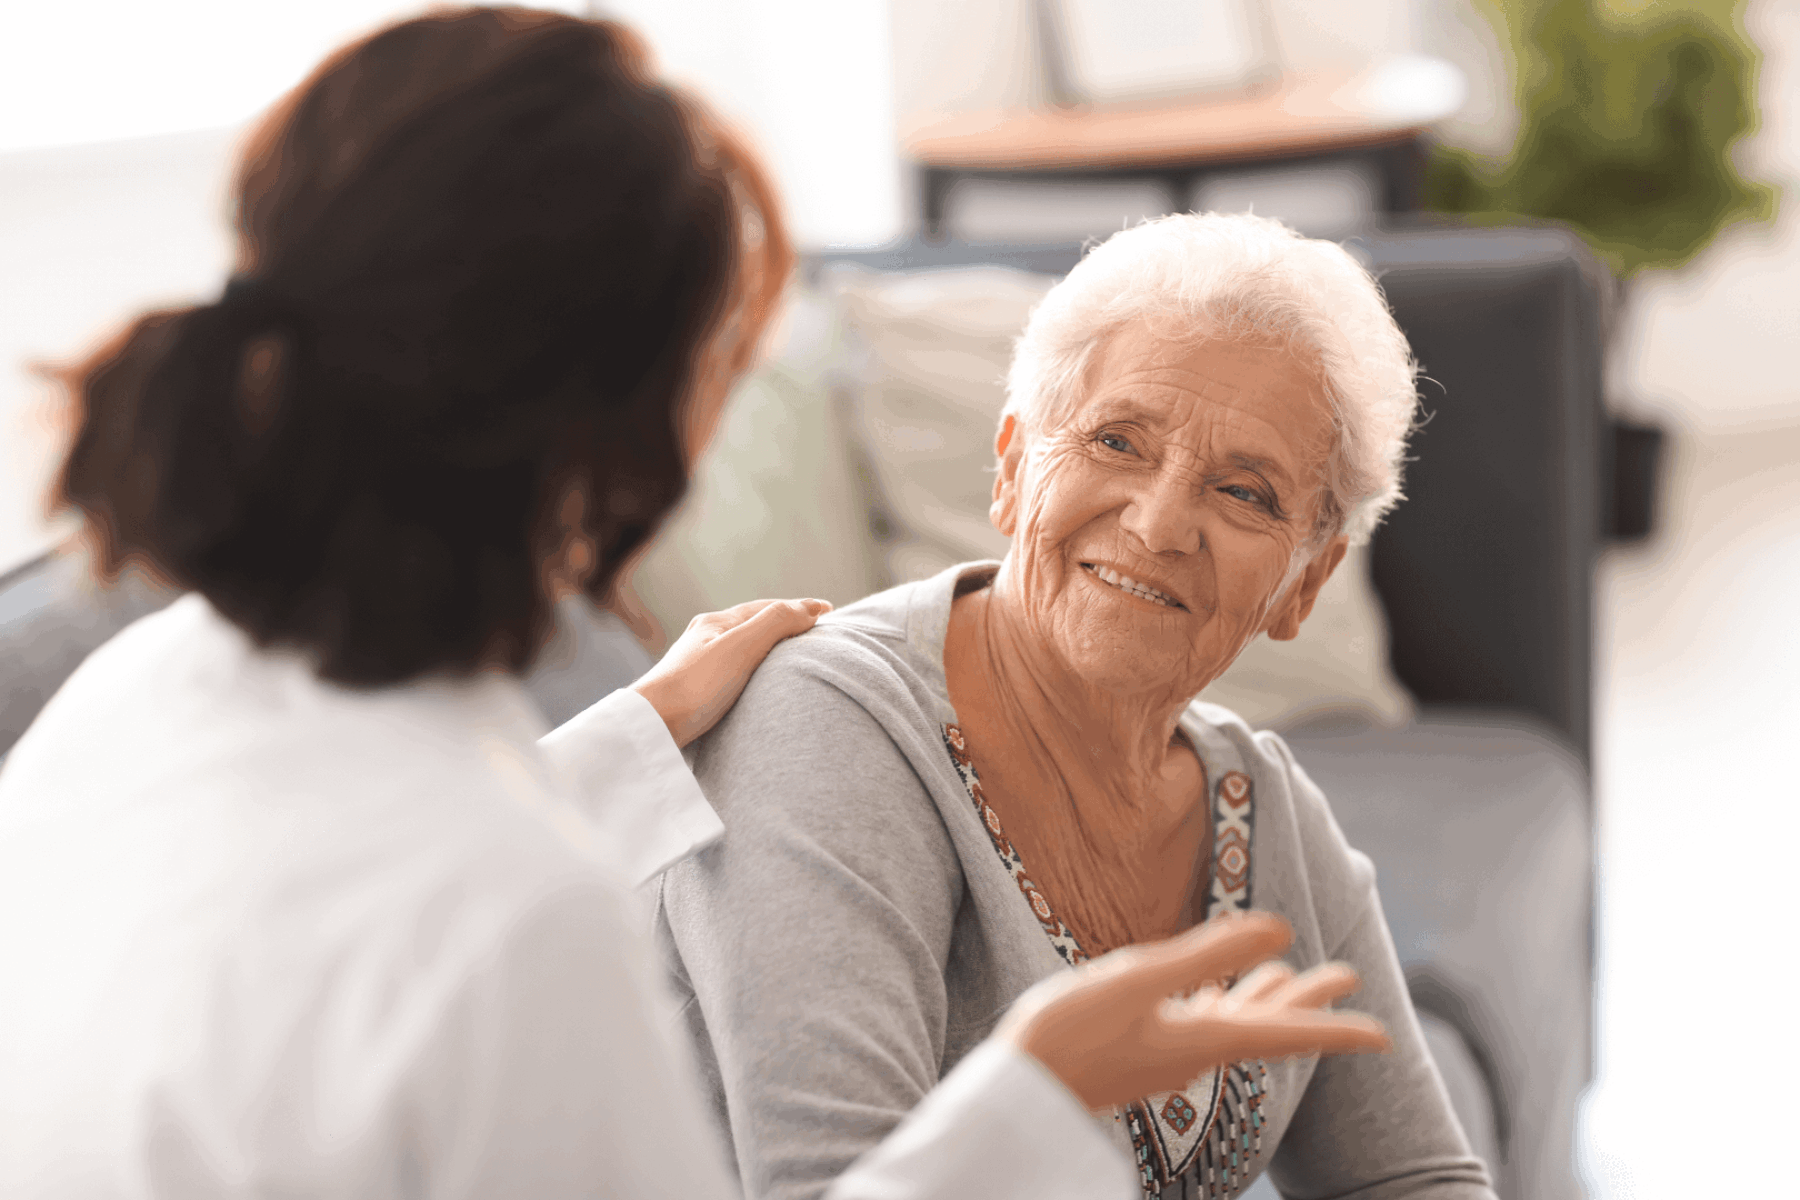 Older adult, smiling, having a conversation with a healthcare provider.